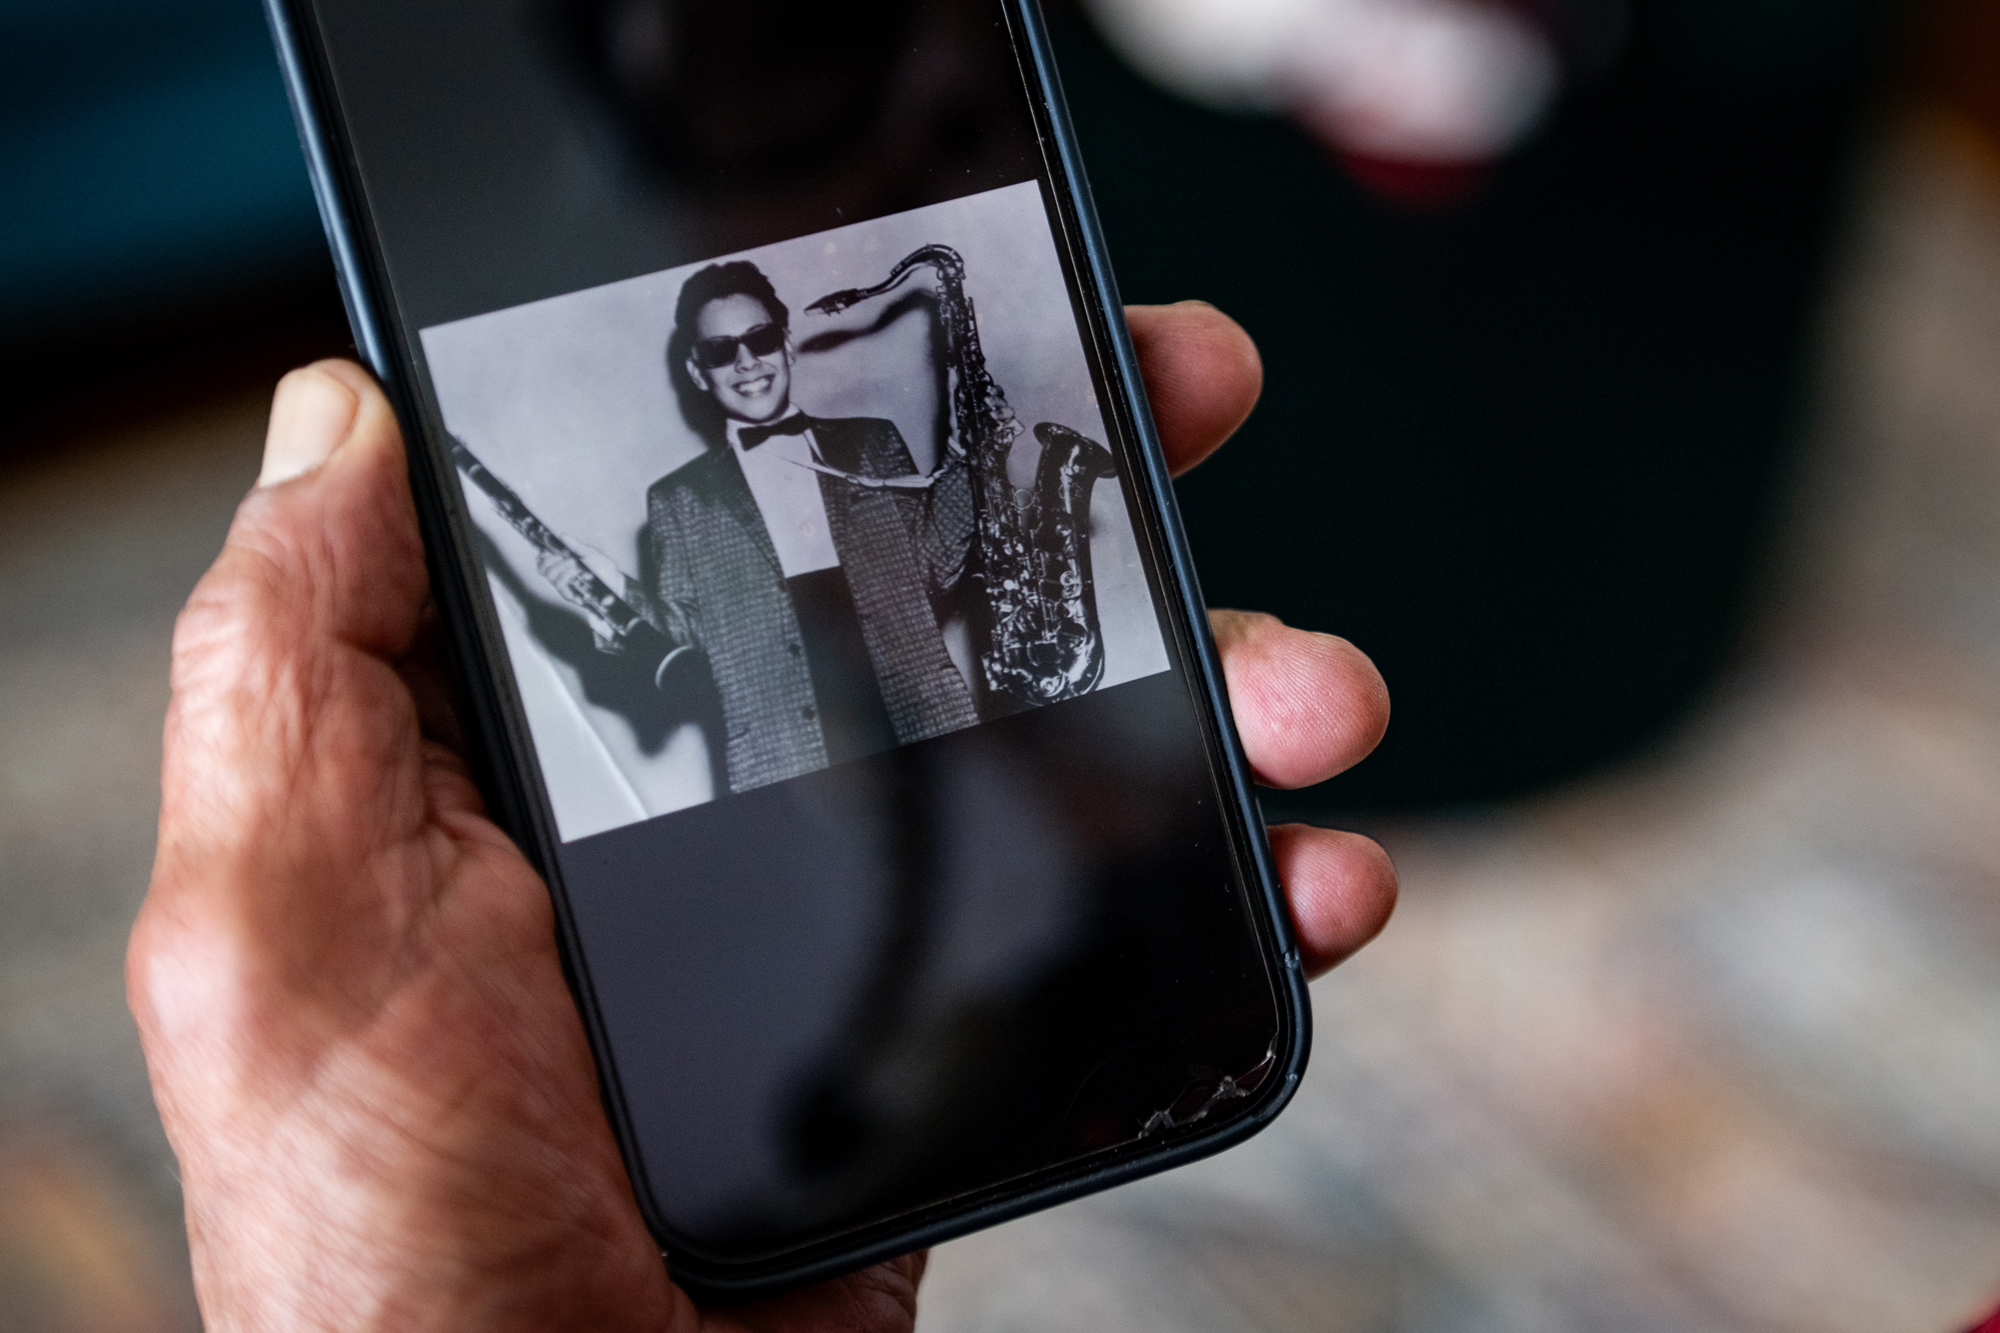 A hand holds a cell phone with a black and white photograph on it of a young man holding a clarinet and a saxophone, wearing a suit and sunglasses